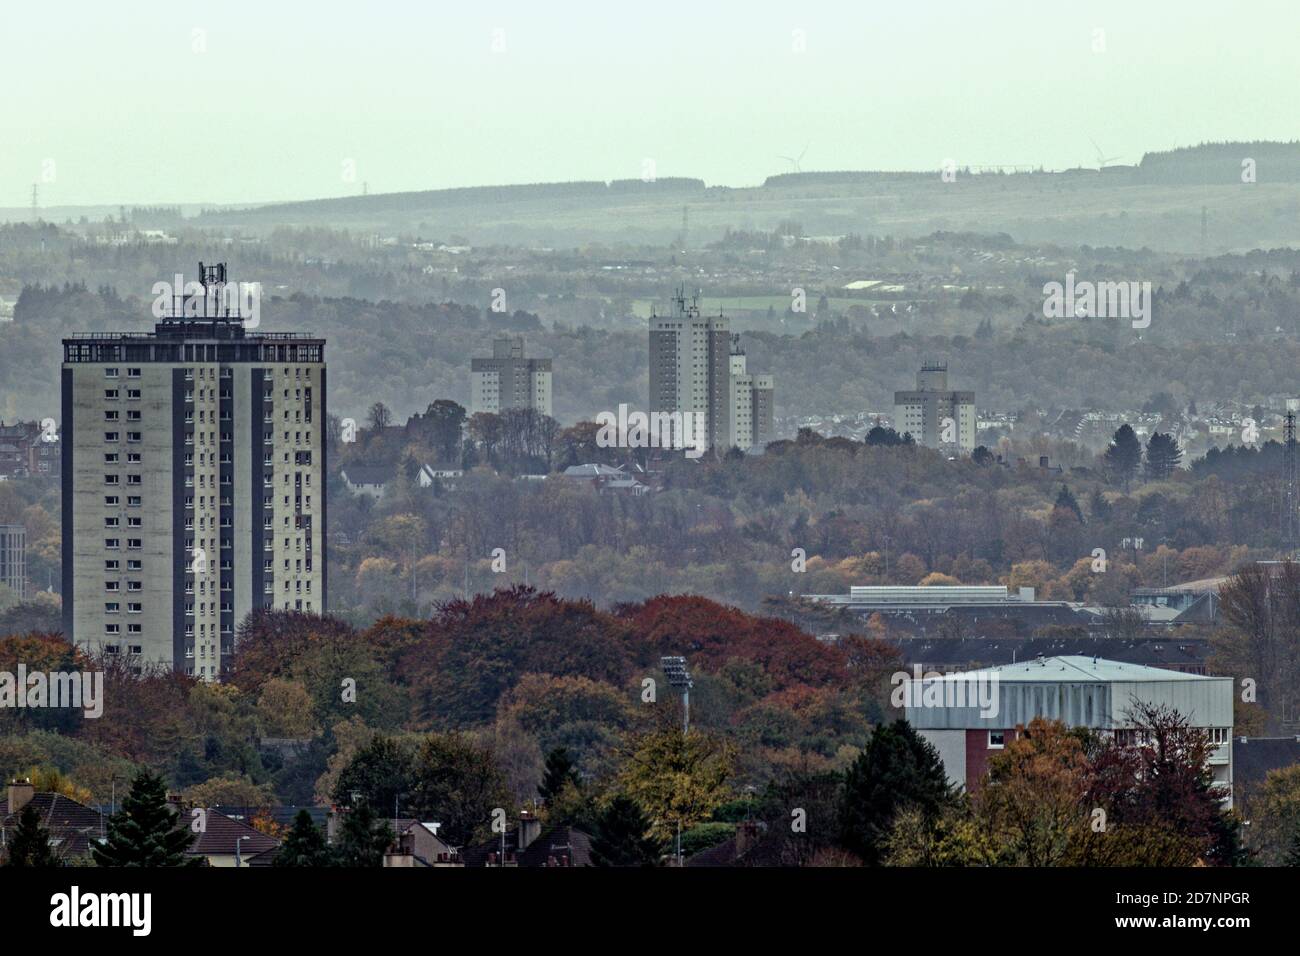 Glasgow, Scotland, UK. 24th October, 2020: UK Weather: Grey cold day saw grey sky and winter appearing over the south of the city and its towers. Credit: Gerard Ferry/Alamy Live News Stock Photo